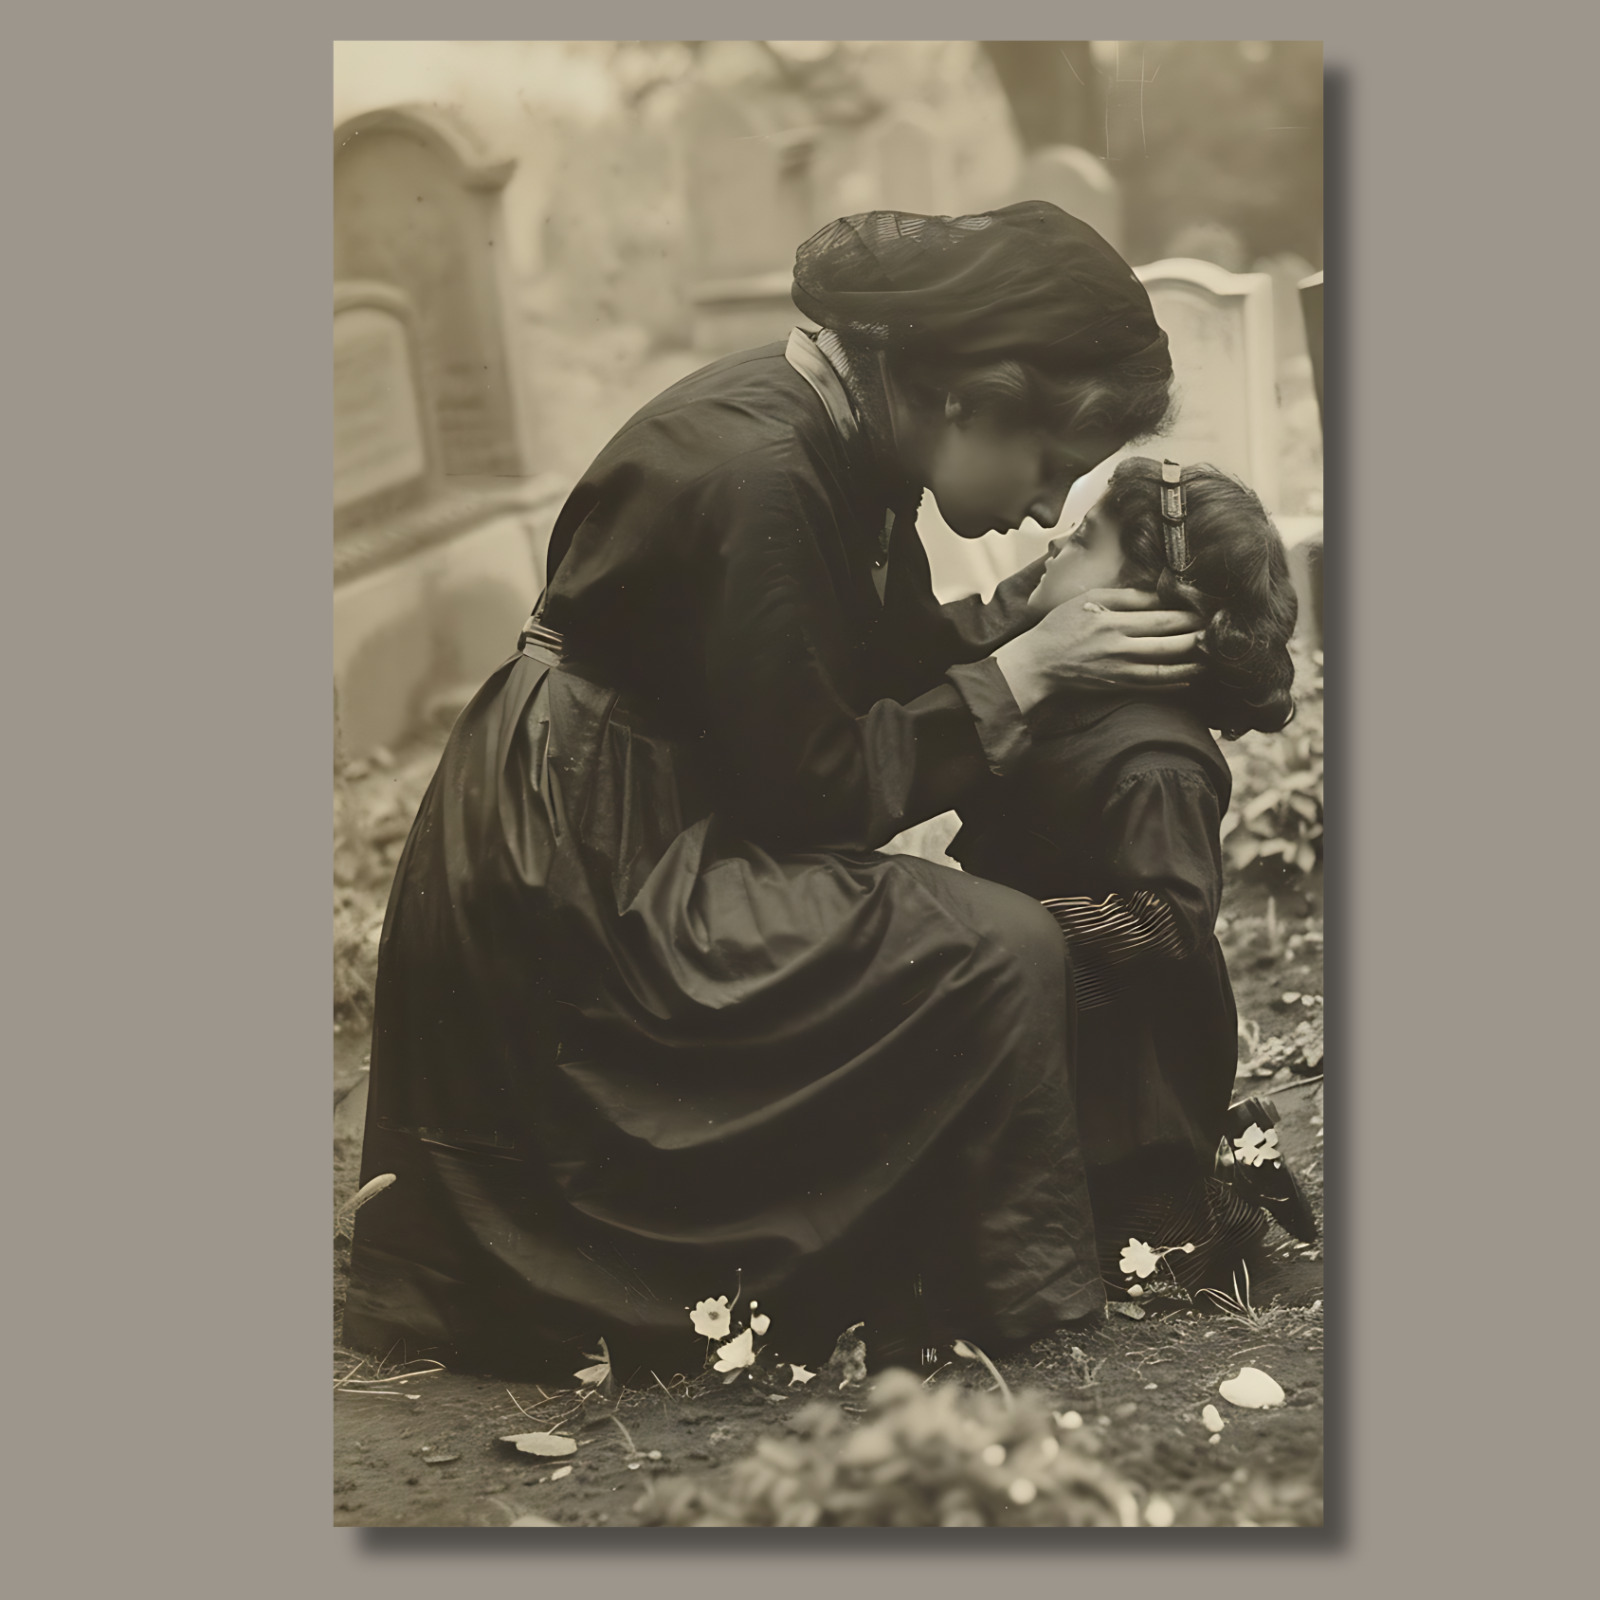 Mourning Victorian Woman Comforting Child Eternal Love - Photo 1800s Vibe